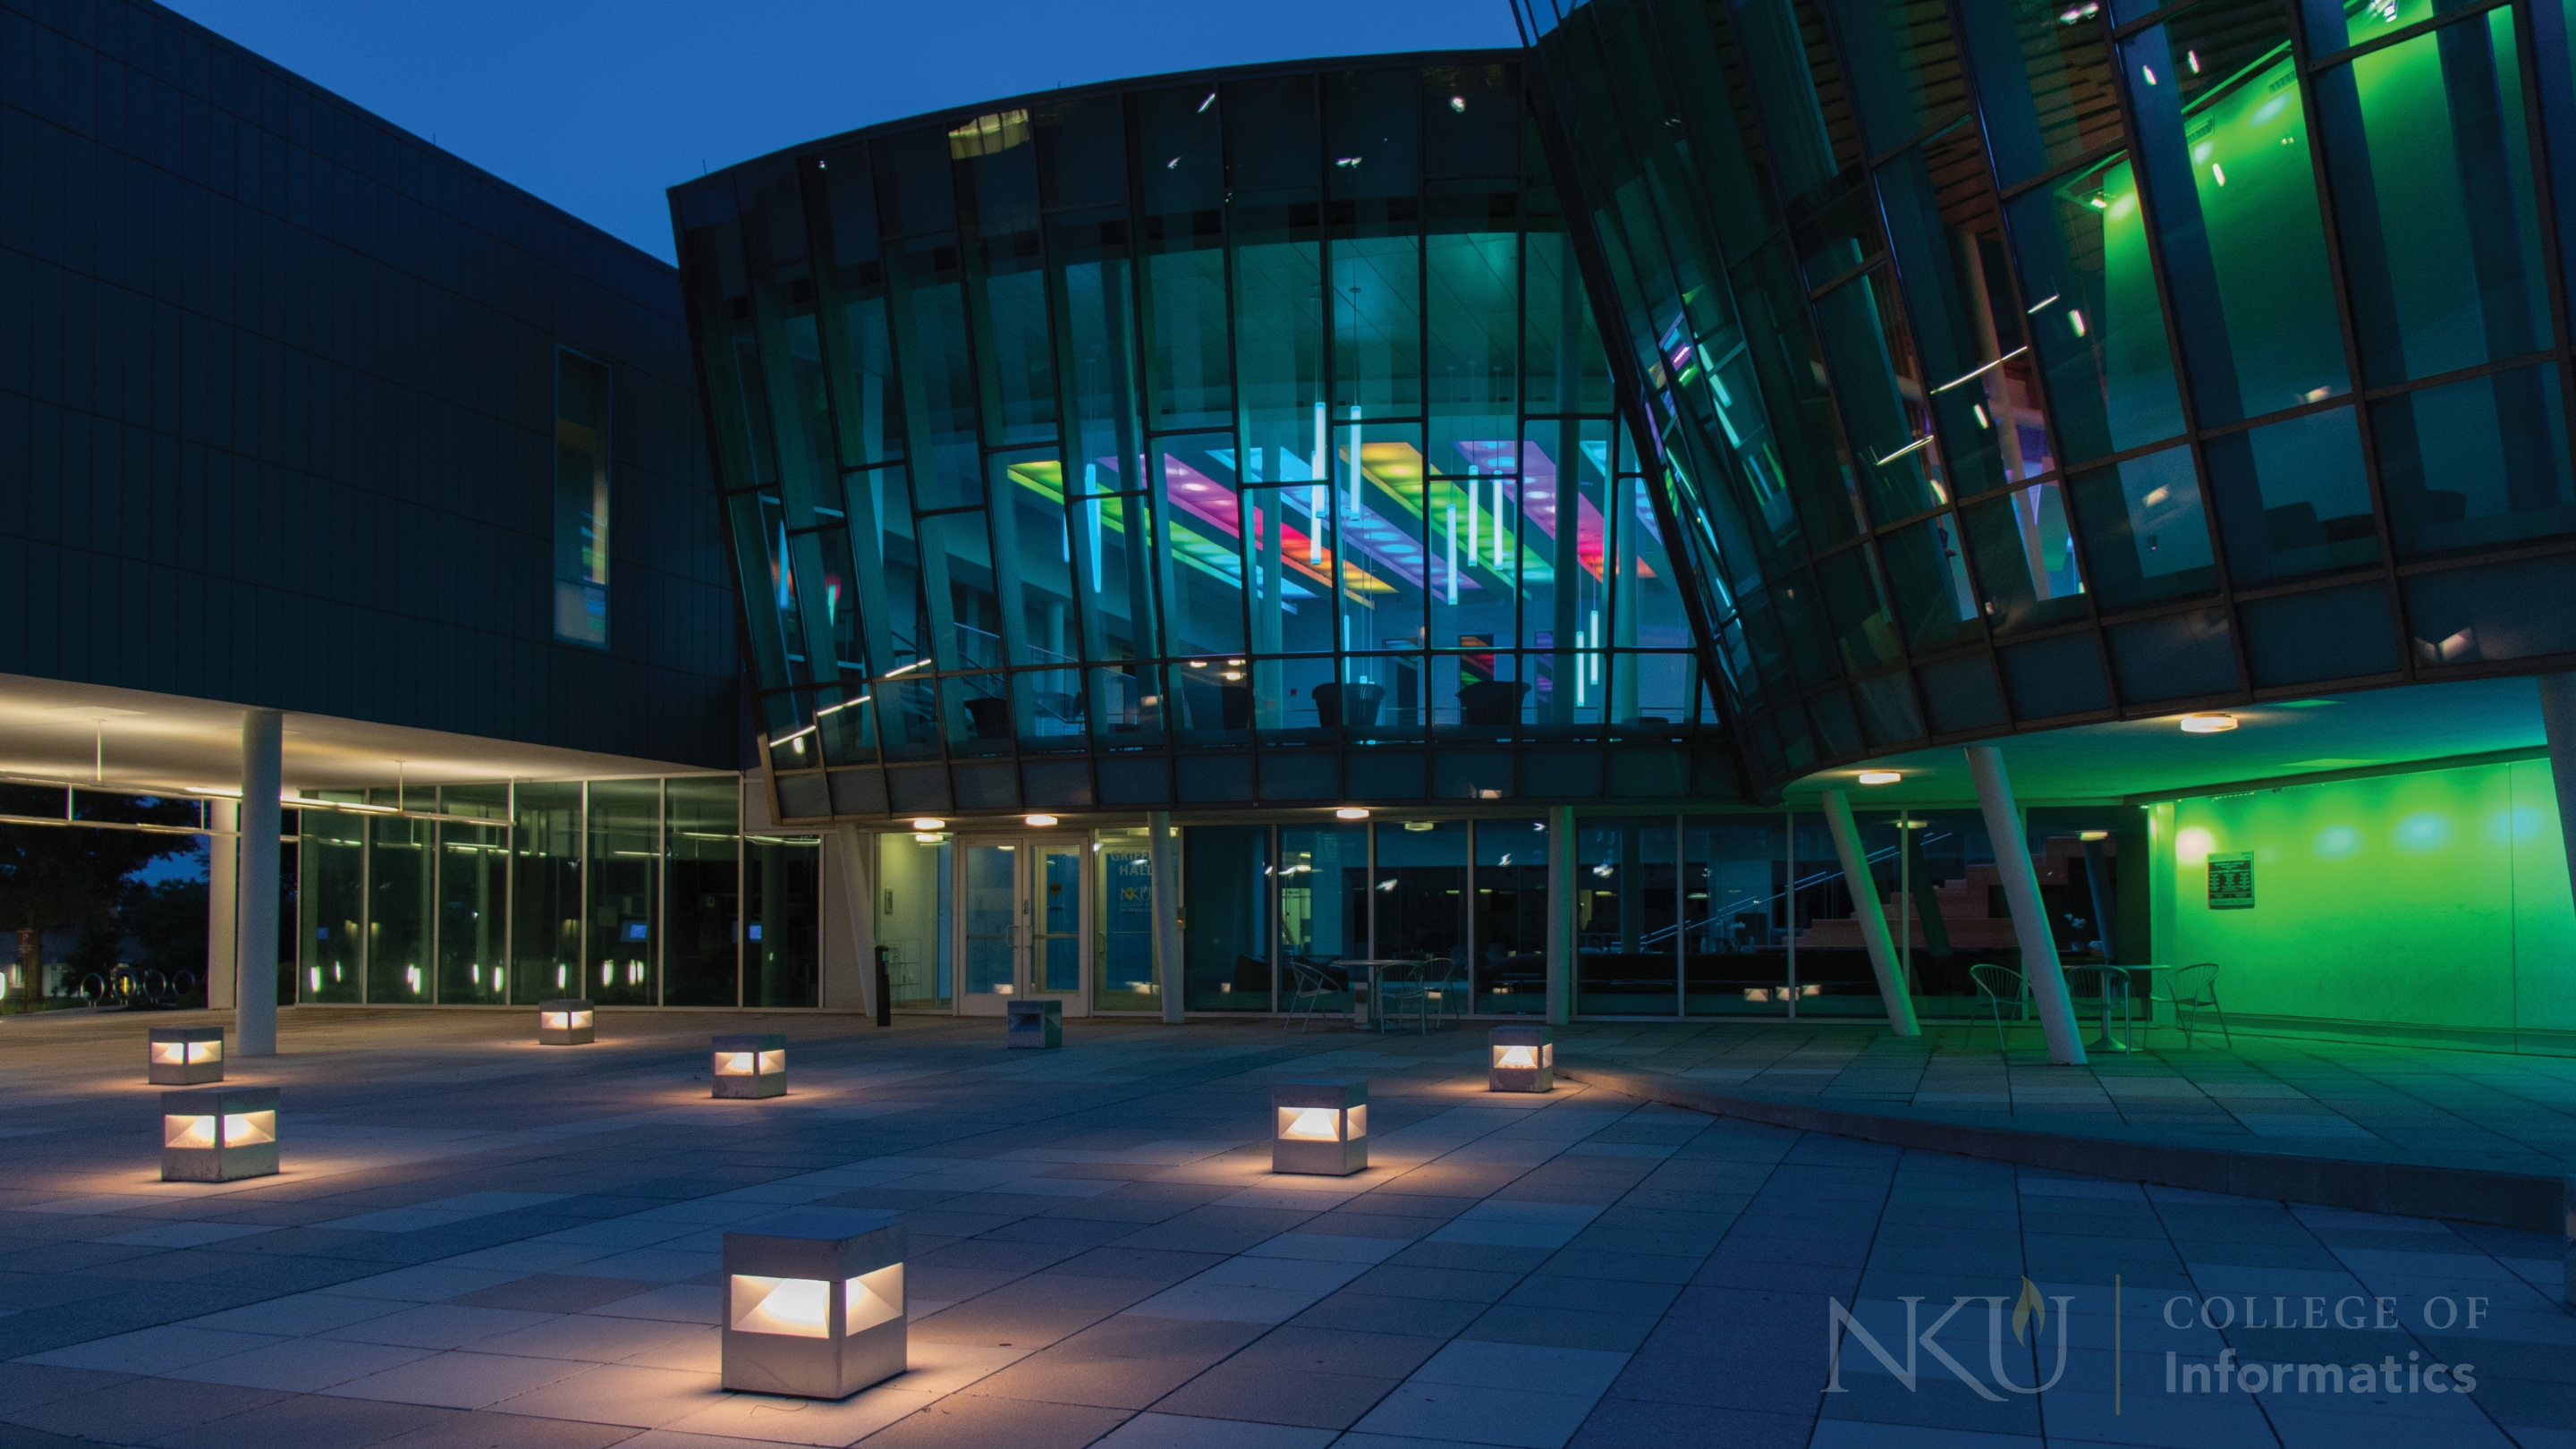 Griffin Hall tech building at NKU